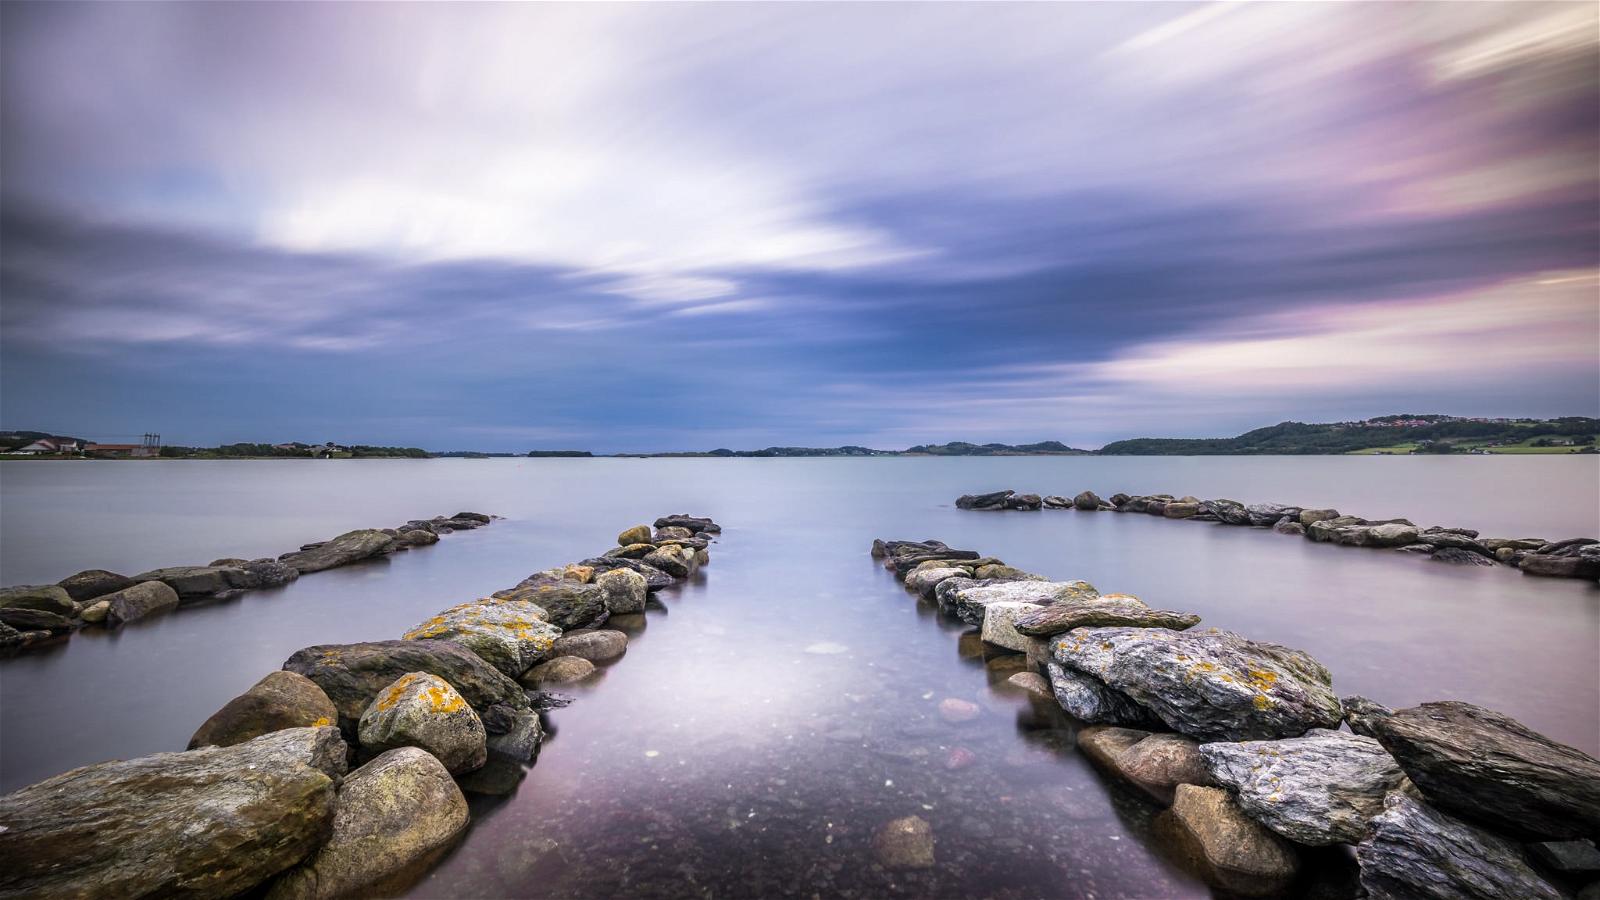 Immagine di Hafrsfjord. longexposure travel sunset sea sky seascape motion water weather norway clouds reflections landscape geotagged photography stavanger photo hafrsfjord rocks europe no sony fjord fullframe onsale ultrawide a7 rogaland bythesea sonya7 sonyfe1635